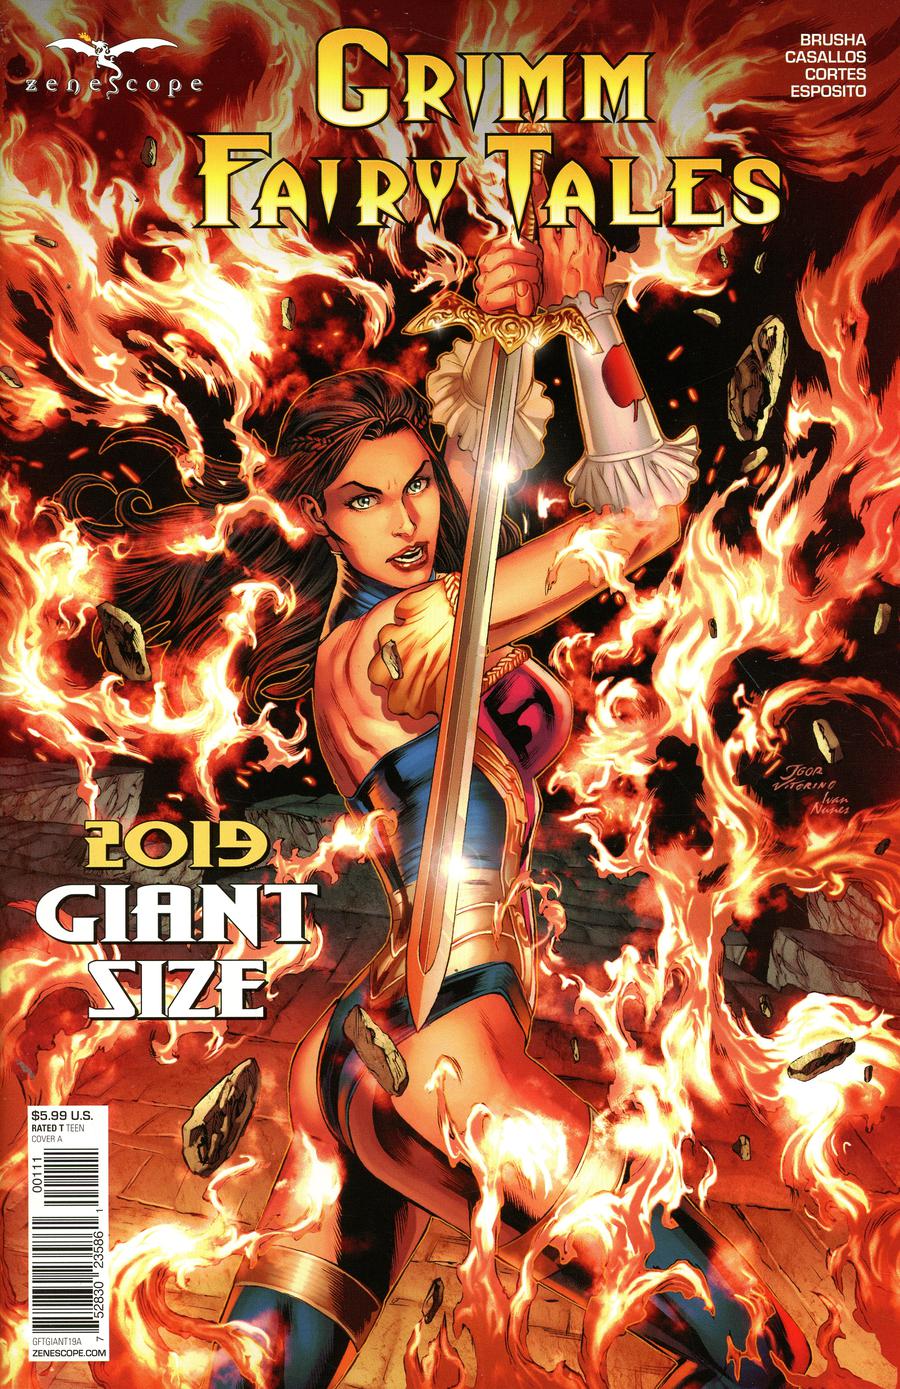 Grimm Fairy Tales 2019 Giant-Size #1 Cover A Igor Vitorino